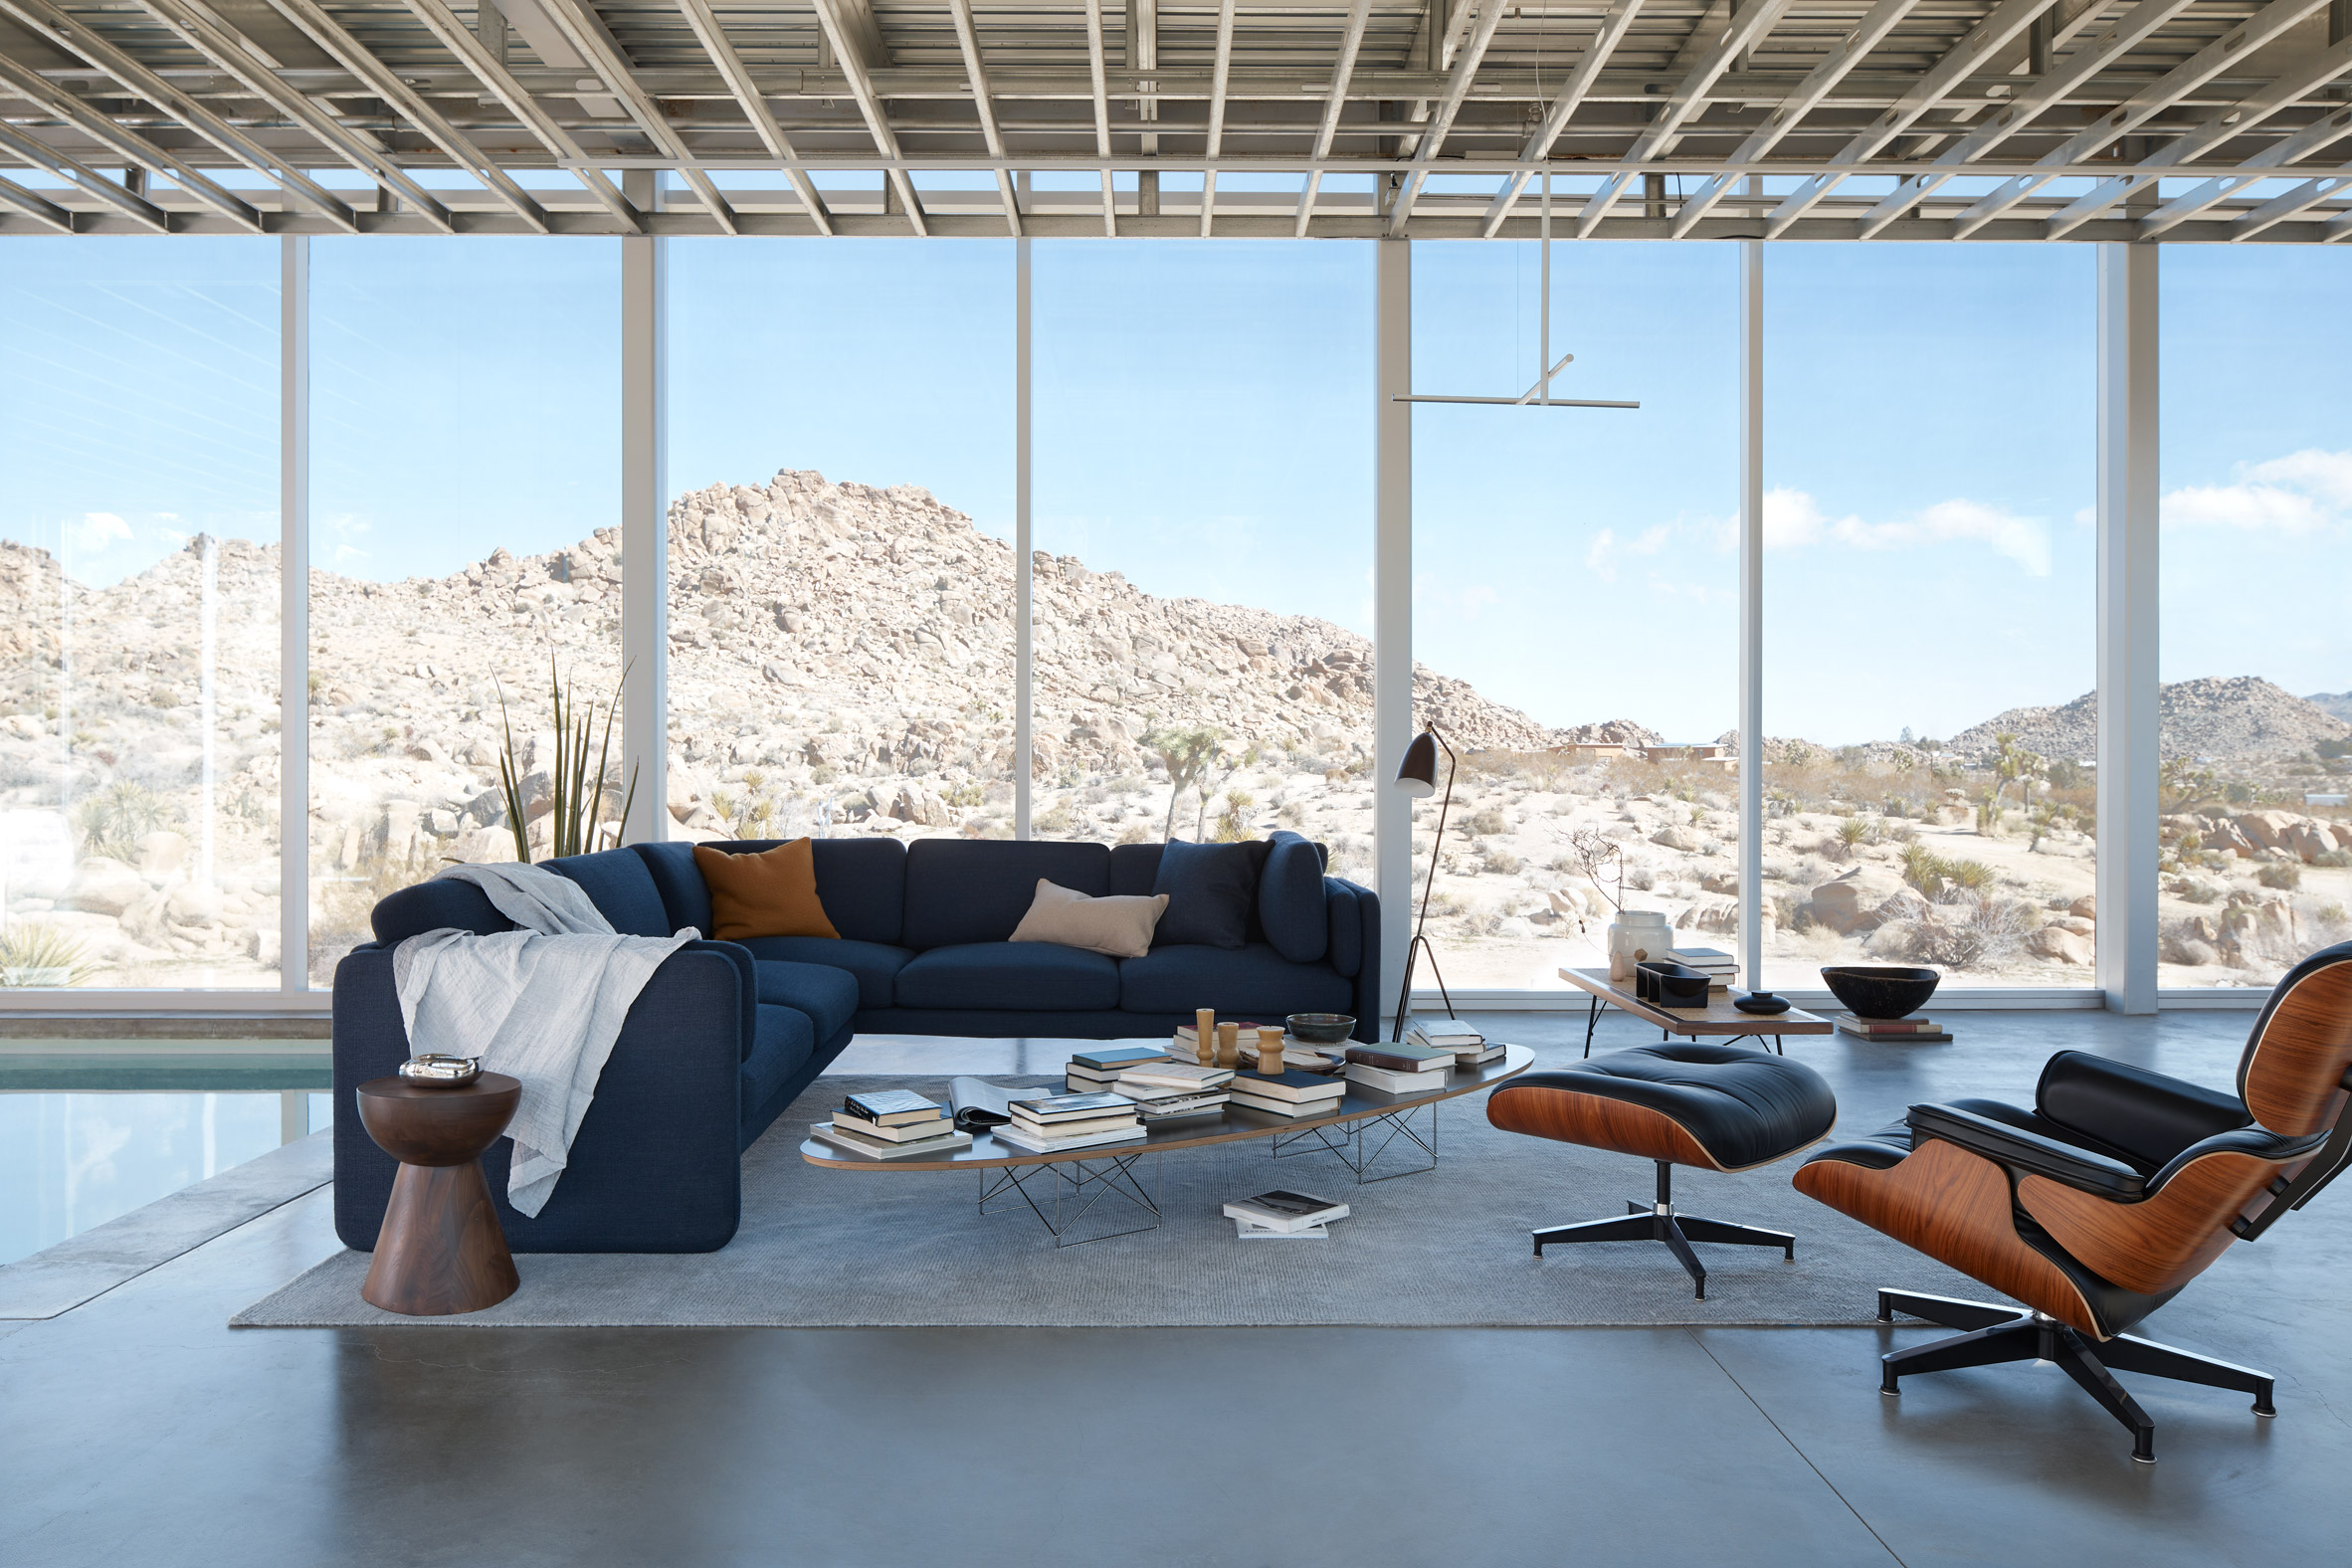 A blue sofa and a leather reclining chairs sit in front of a glazed wall looking over a desert